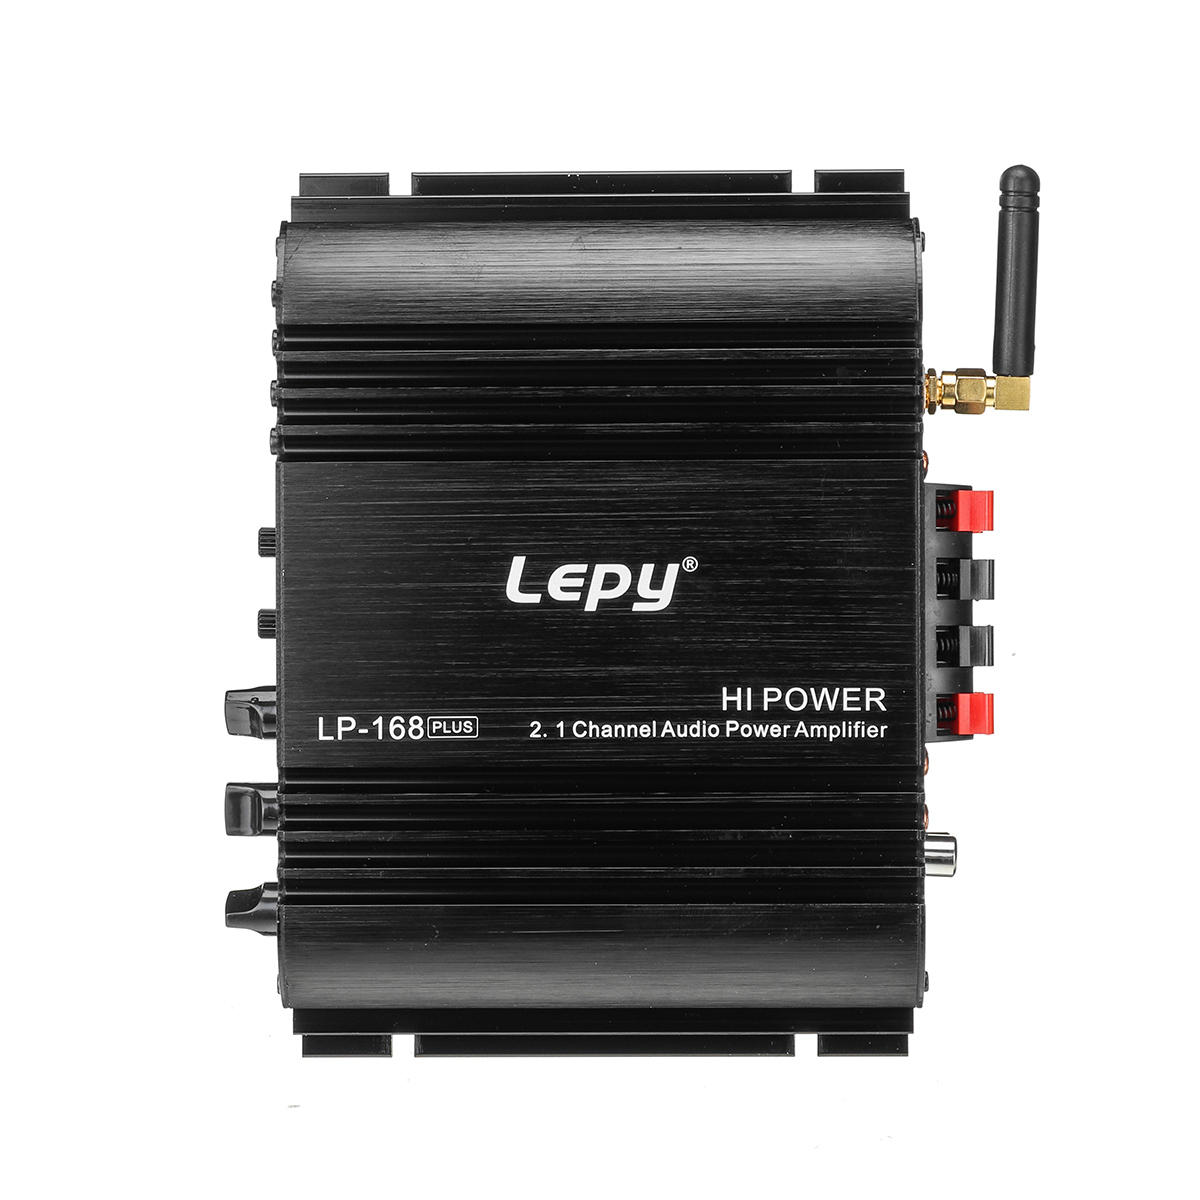 LEPY 168Plus HiFi Amplifier Amp Super Bass bluetooth 2.1 Channel Stereo Power FM 19V 3A with US Plug for Car Home